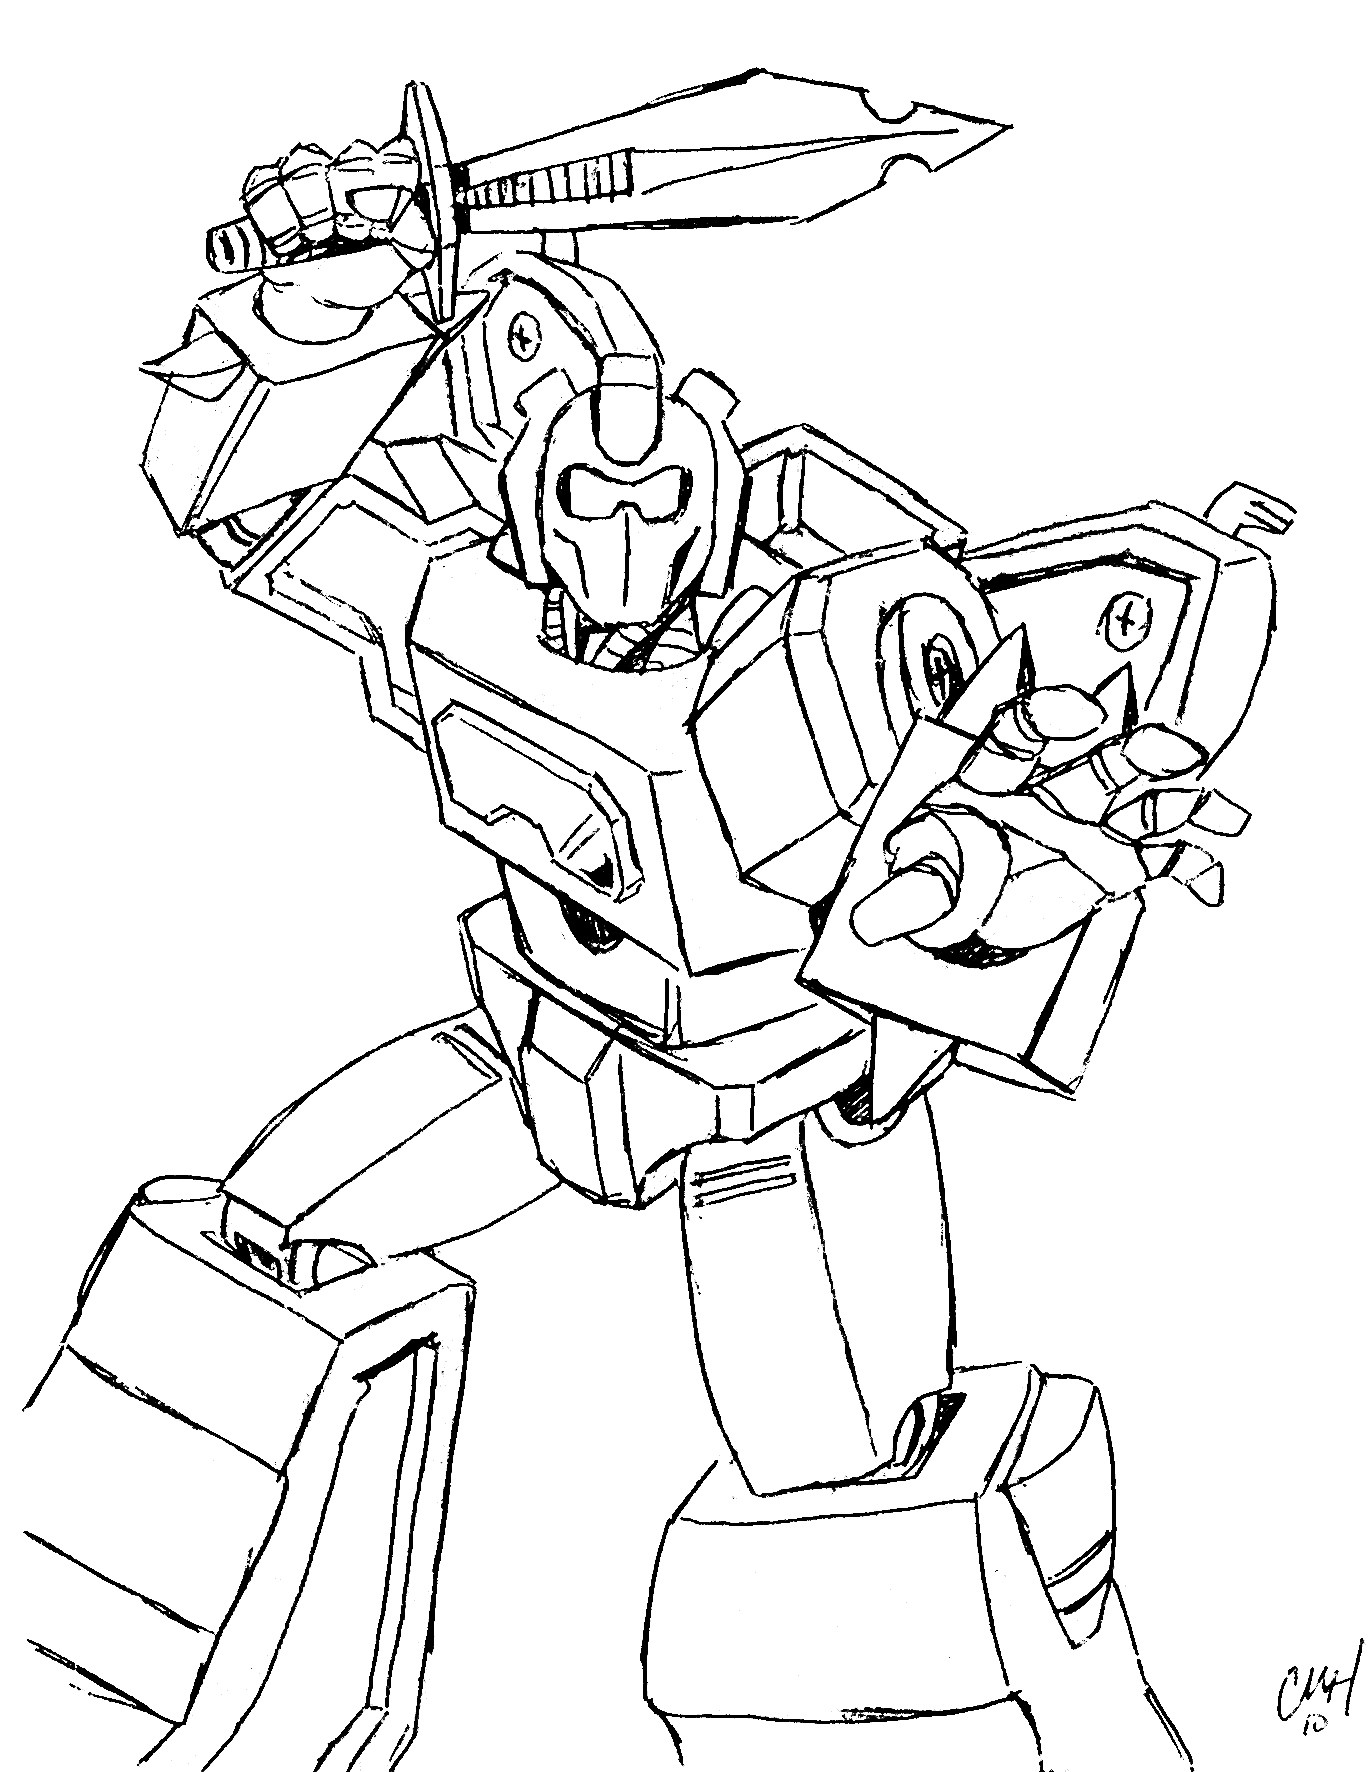 Free Printable Transformers Coloring Pages For Kids HD Wallpapers Download Free Images Wallpaper [wallpaper896.blogspot.com]